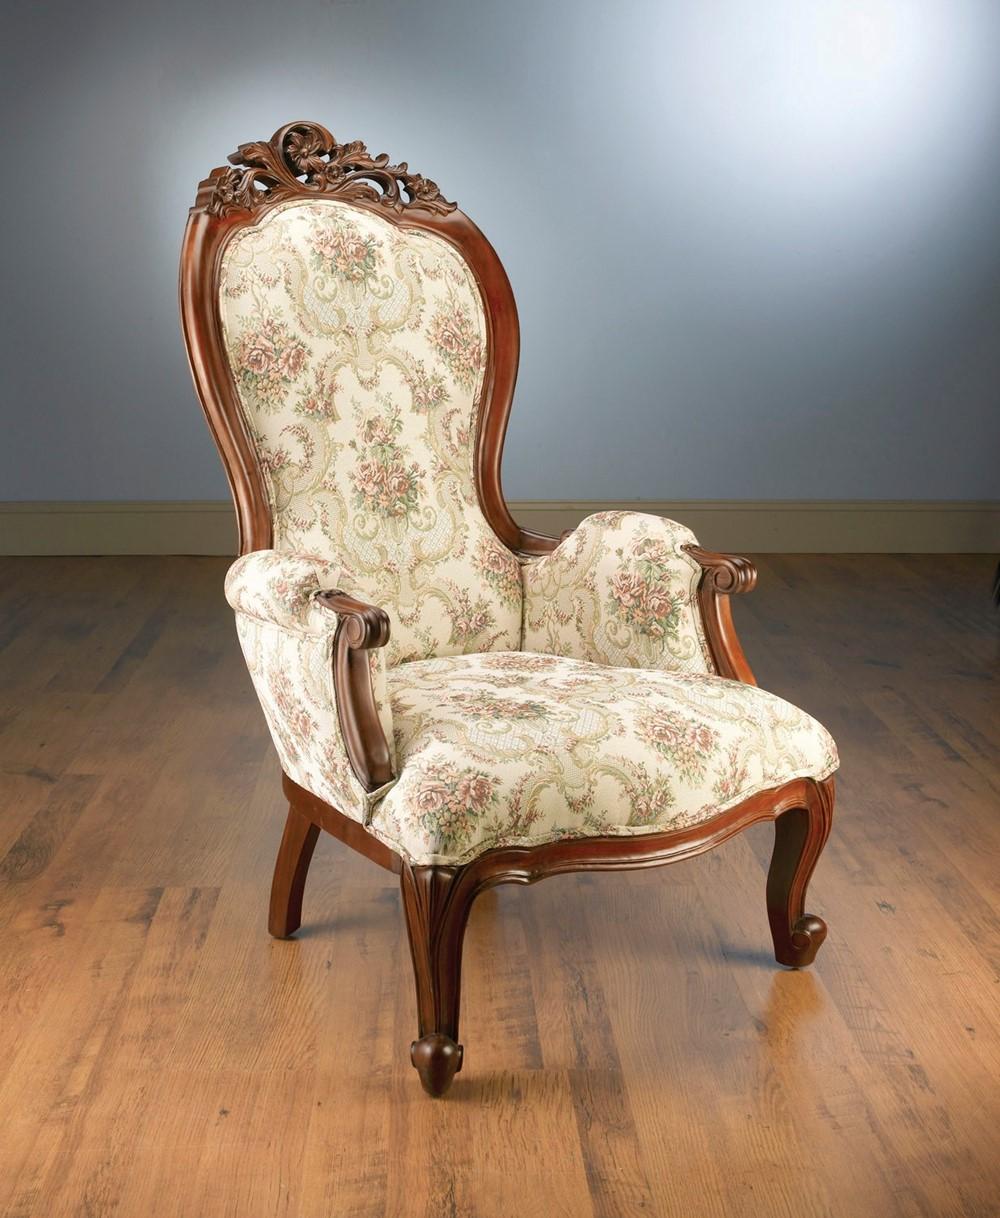 Classic, Traditional Dining Arm Chair 31040 AA-31040-DCH-Set-4 in Medium Brown, White Fabric